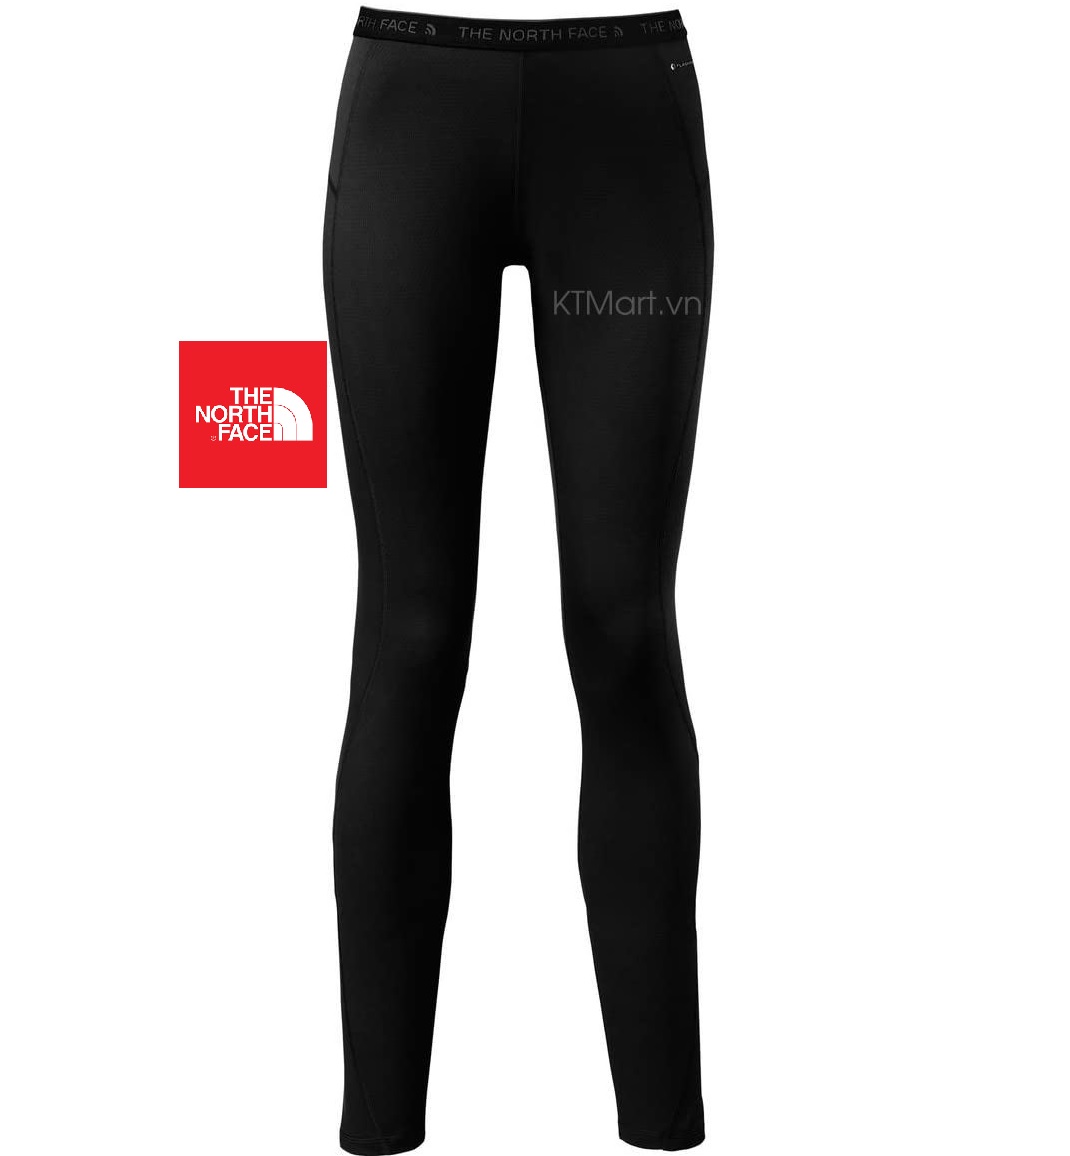 The North Face Light Long Underwear Tights CM00 The North Face size M